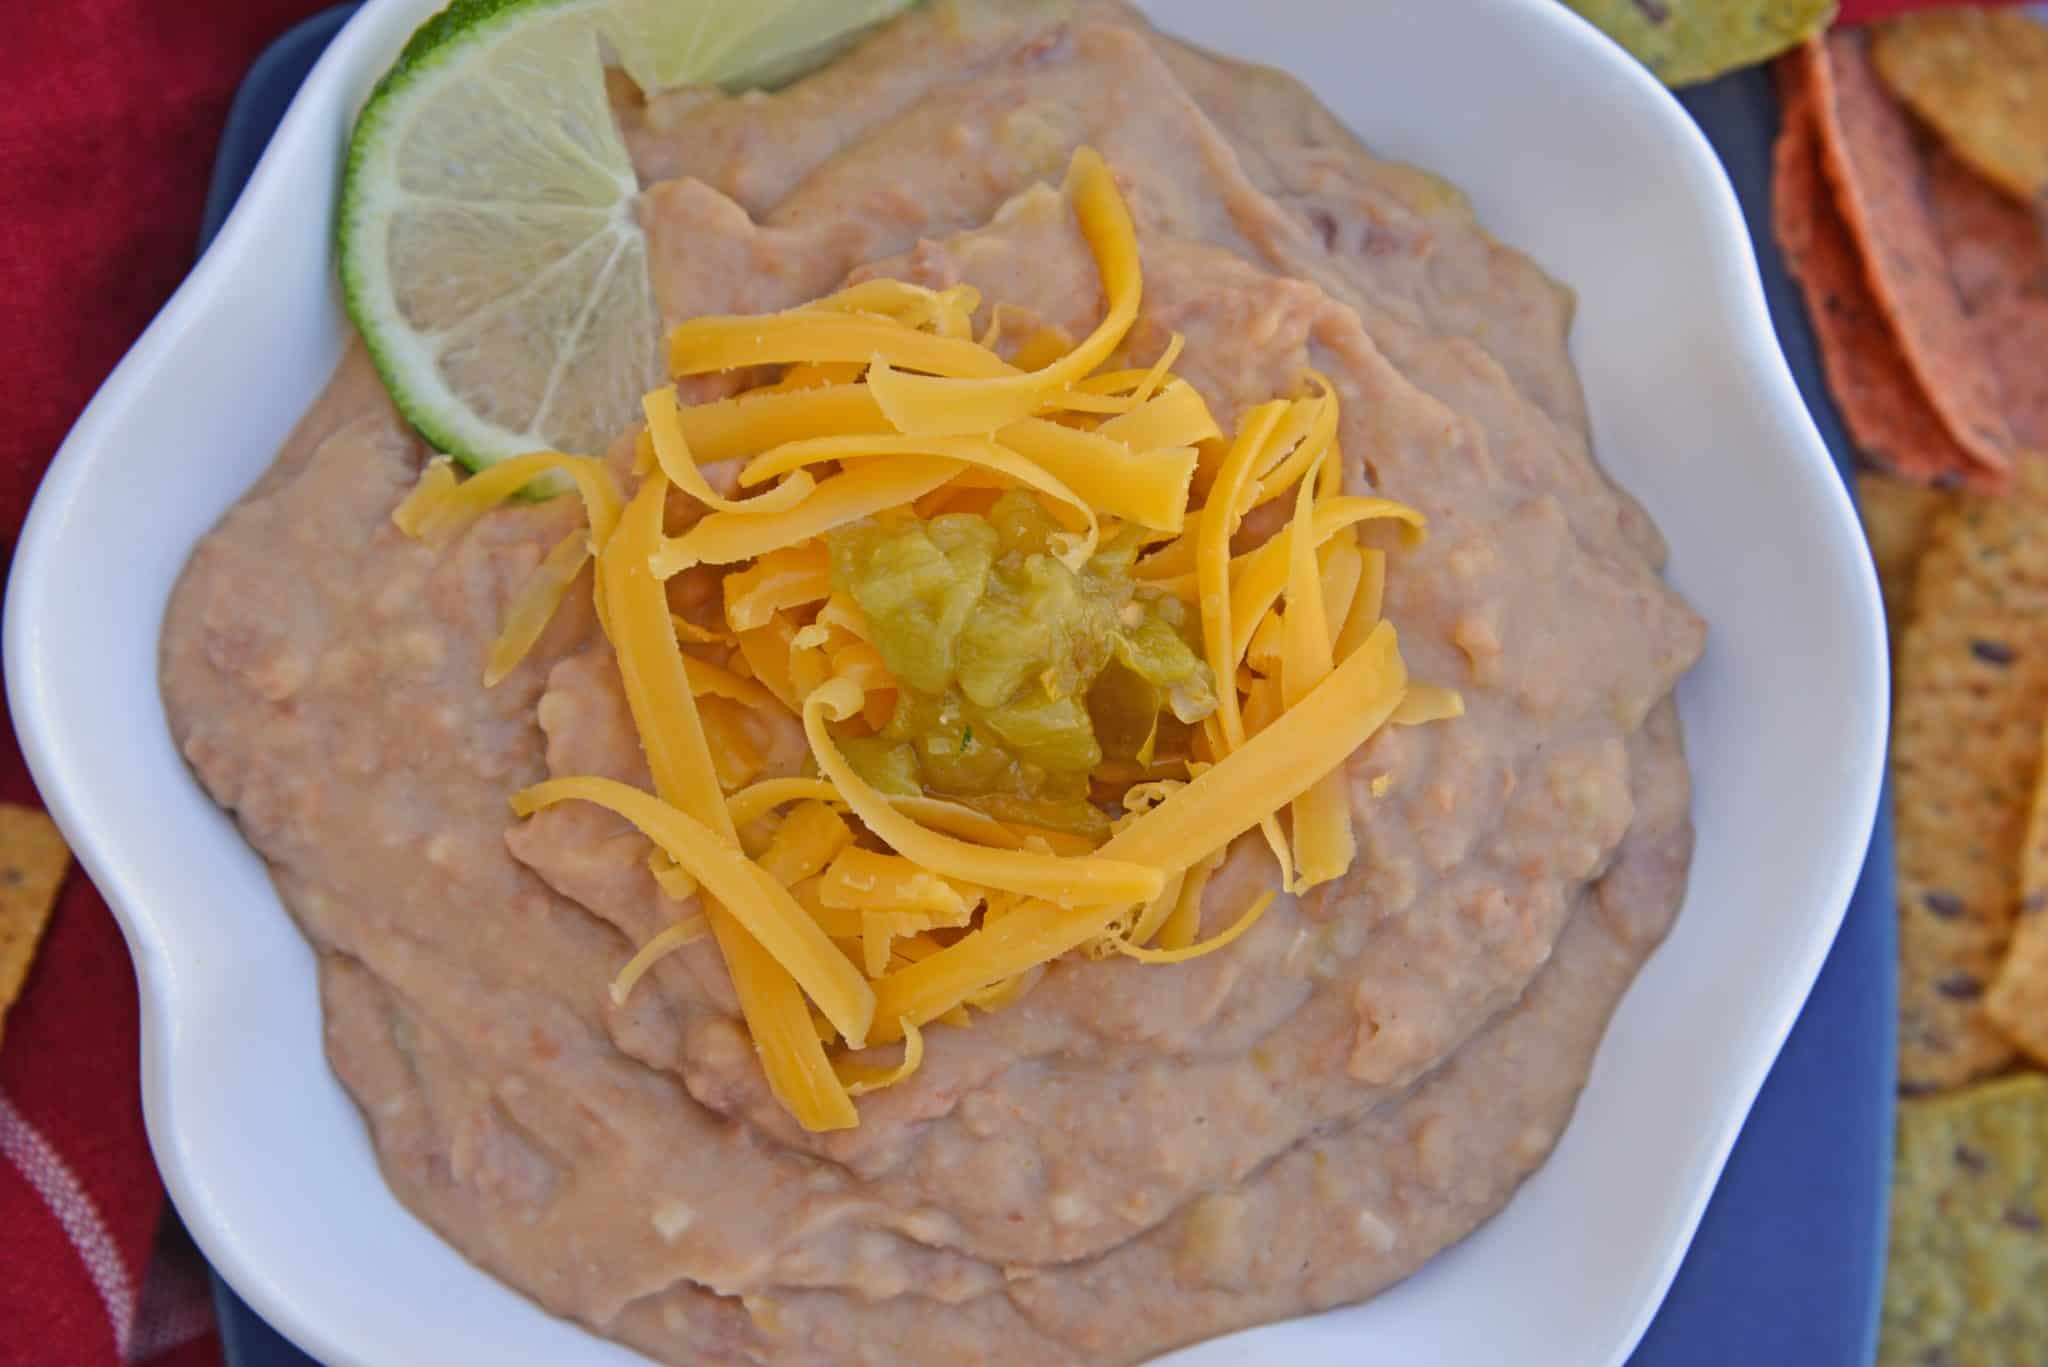 Mexican Refried Beans are an easy homemade refried bean recipe using pinto beans, green chilies, cheese and Mexican spices. Ready in just 15 minutes! #refriedbeans #mexicansidedish www.savoryexperiments.com 